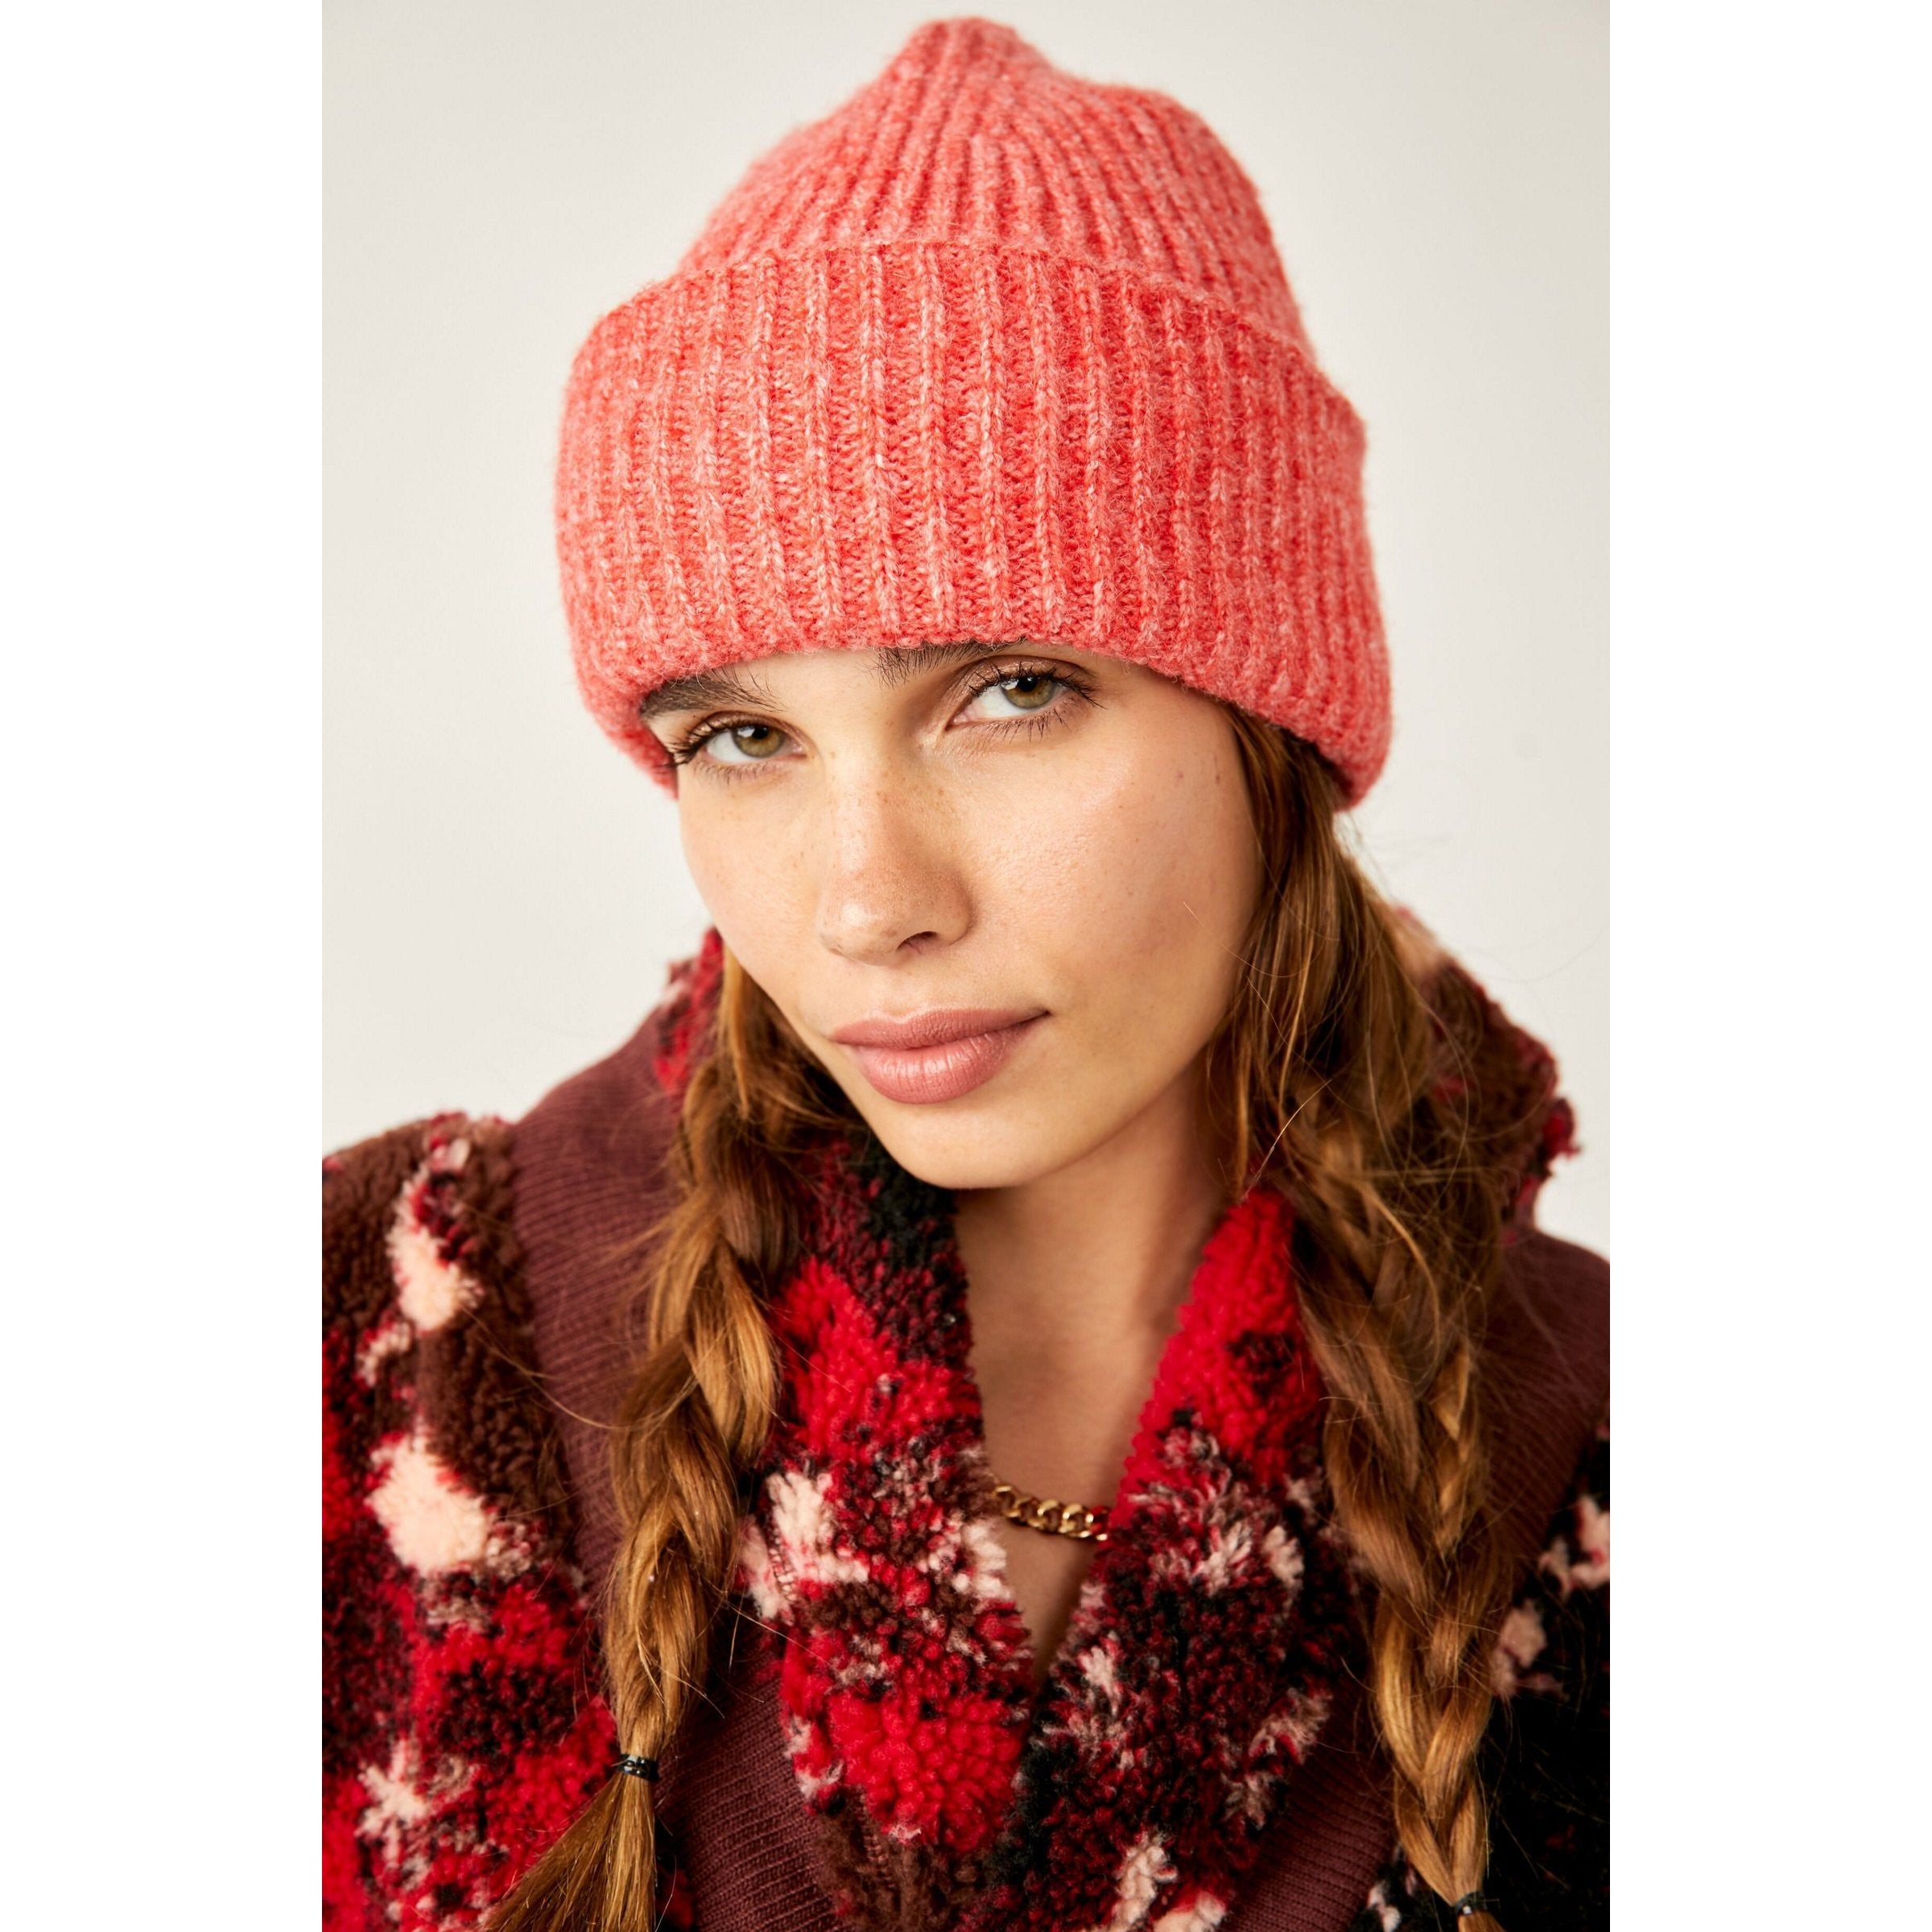 Free People - Harbor Marled Ribbed Beanie in Cherry Tomato